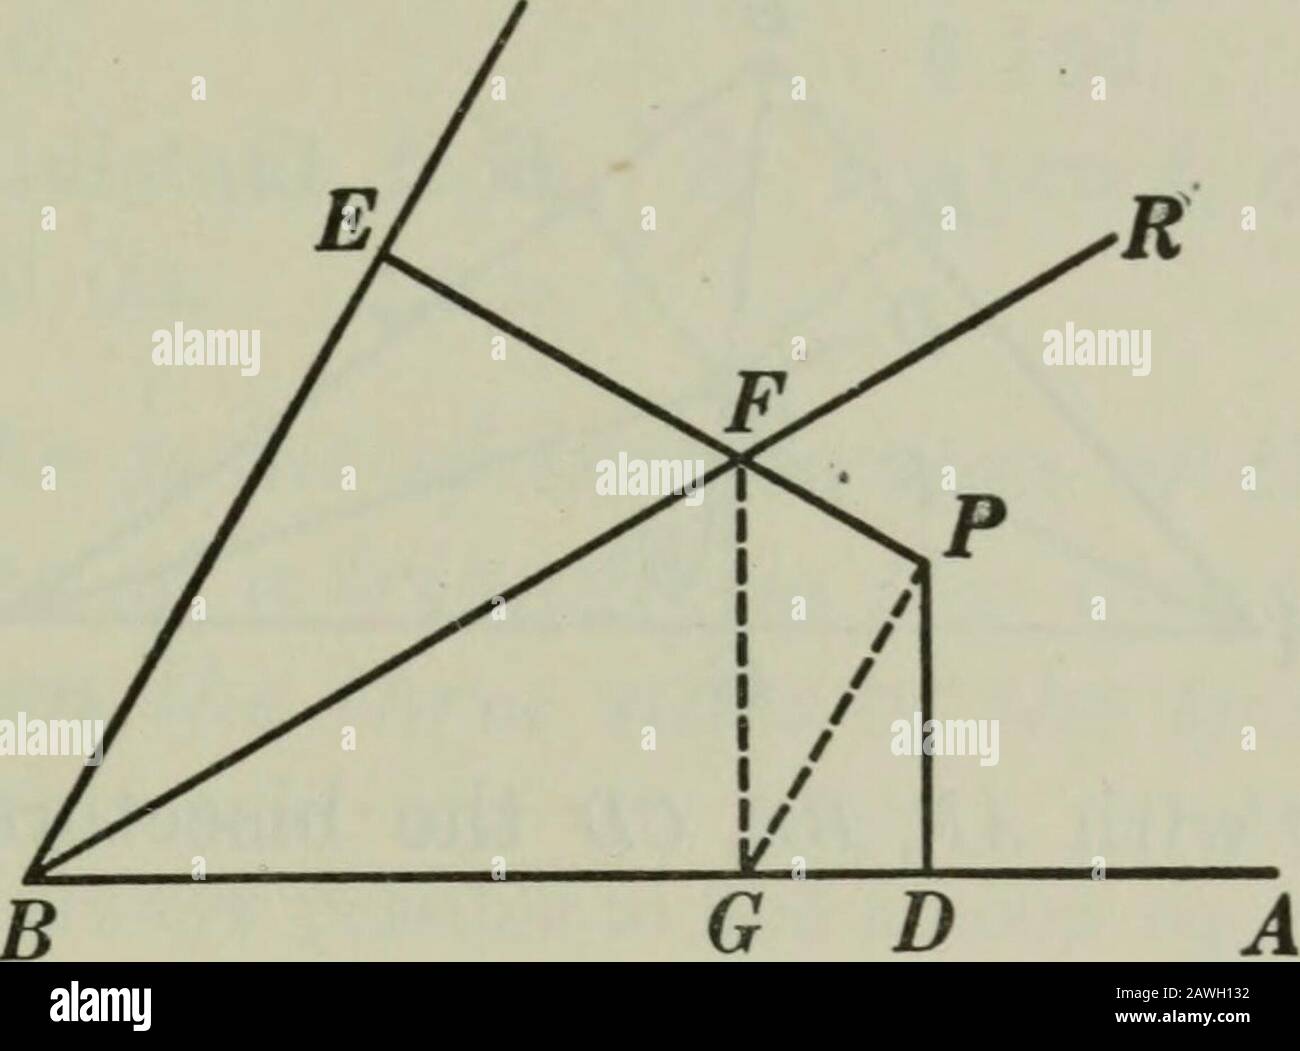 Plane and solid geometry . P and PBE^ PB=PB. 2. Z DBP = Z PBE, 3. .-. A DBP = APBE, 4. .*. PD = PE, Q.E.D. 253. Prop. XL may be stated as follows: Every point in the bisector of an angle is equidistant from thesides of the angle, Ex. 322. Find a point in one side of a triangle which is equidistantfrom the other two sides of the triangle. Ex. 323. Find a point equidistant from two given intersecting linesand also at a given distance from a fixed third line. Ex. 324. Find a point equidistant from two given intersecting linesand also equidistant from two given parallel lines. Ex. 325. Find a poin Stock Photo